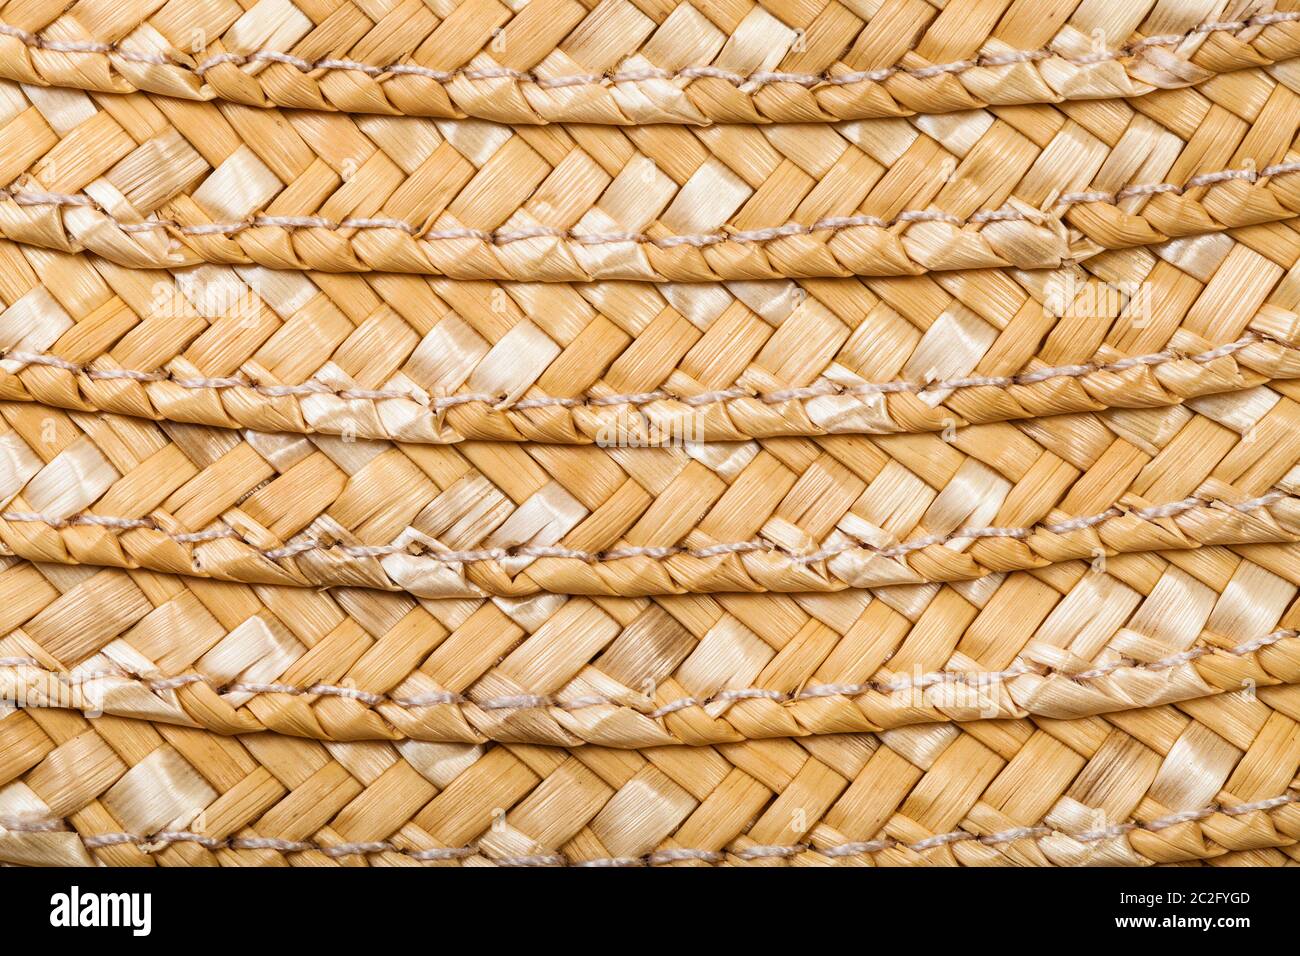 textile square background - detail of stitched summer straw hat from raffia fibers close up Stock Photo